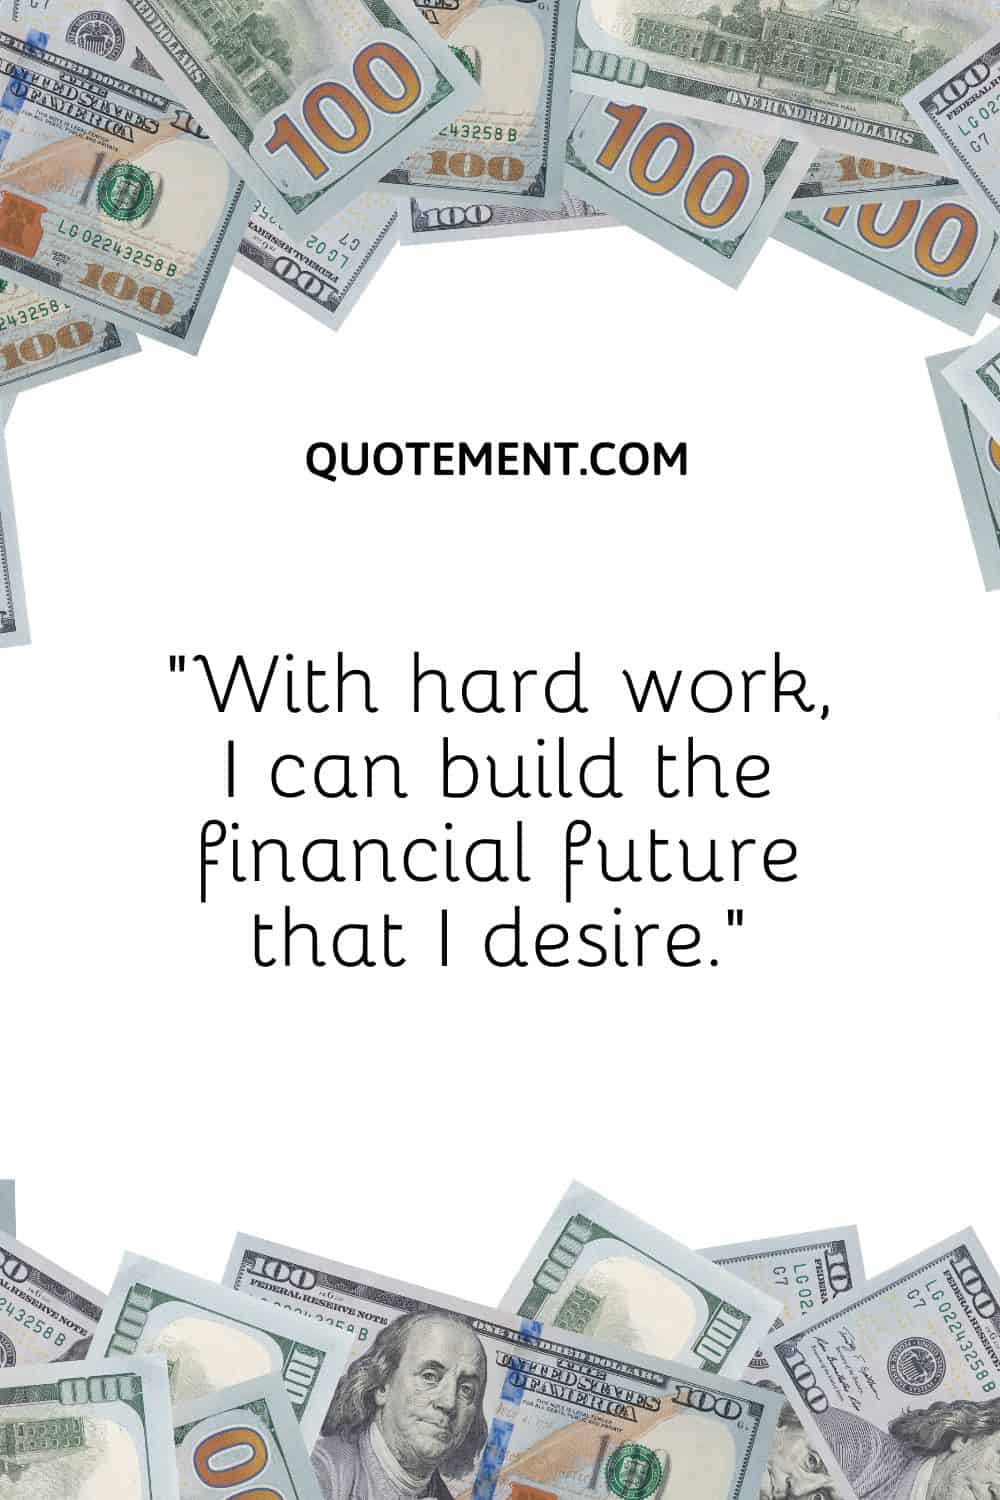 “With hard work, I can build the financial future that I desire.”